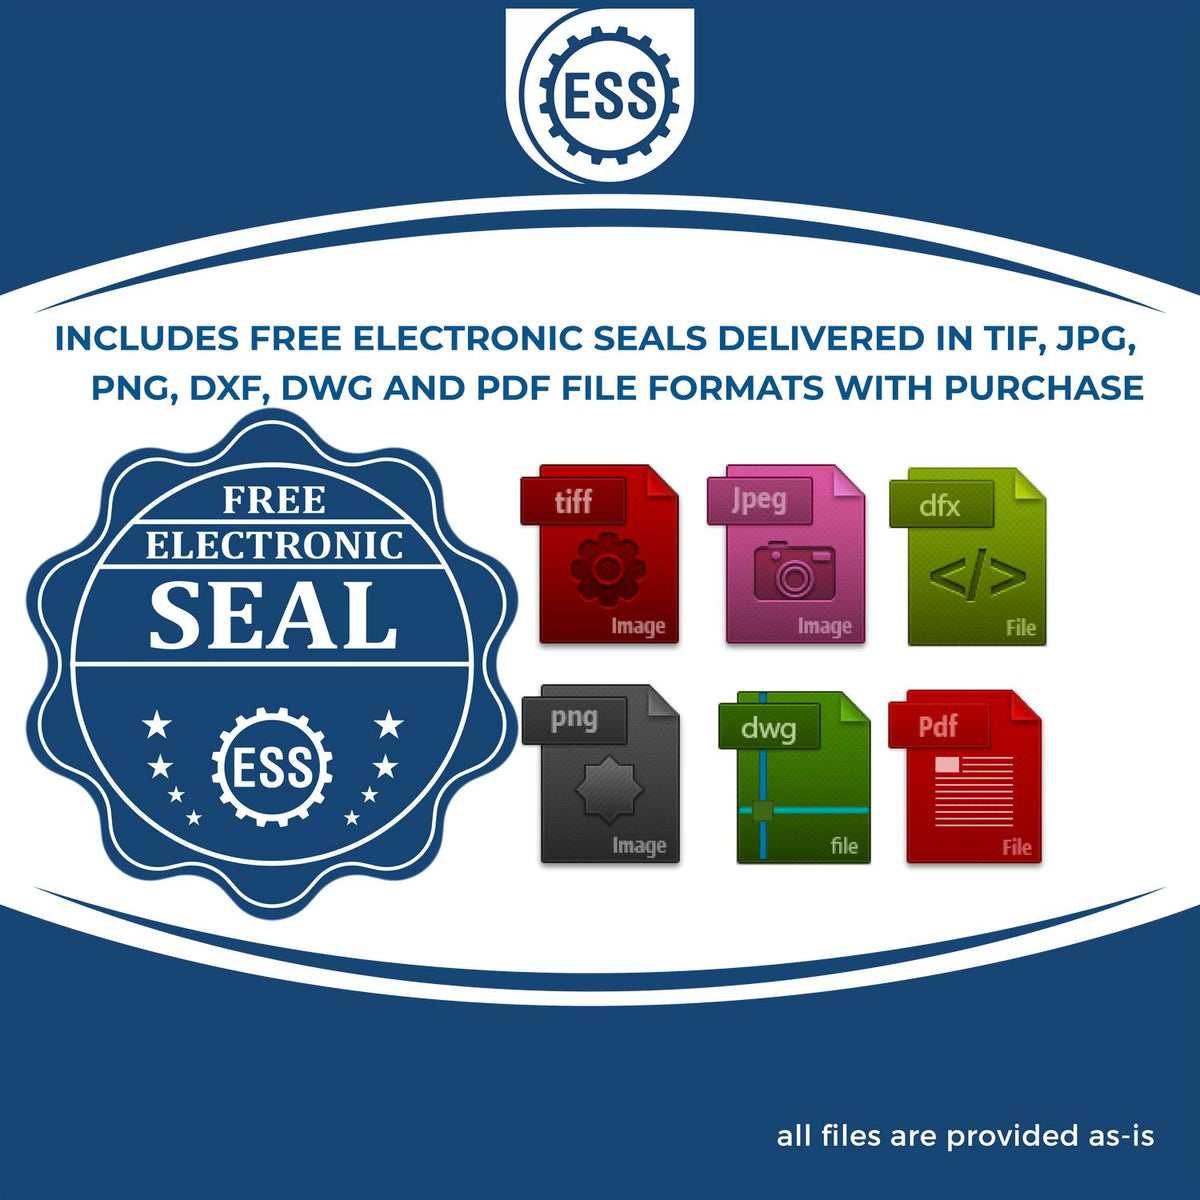 An infographic for the free electronic seal for the Slim Pre-Inked Vermont Architect Seal Stamp illustrating the different file type icons such as DXF, DWG, TIF, JPG and PNG.